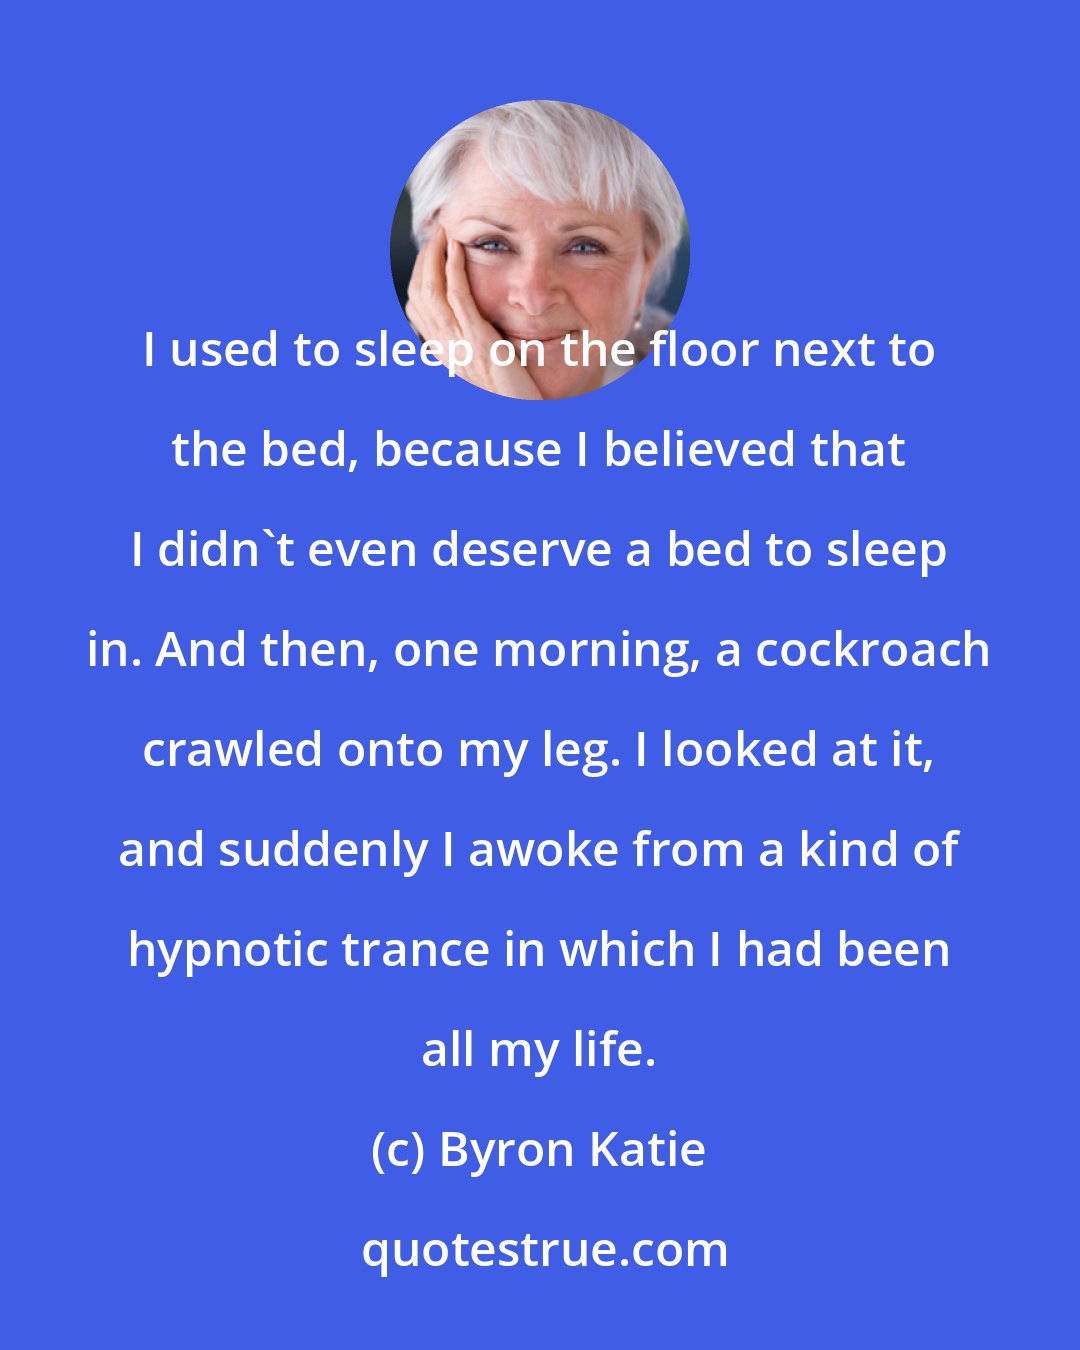 Byron Katie: I used to sleep on the floor next to the bed, because I believed that I didn't even deserve a bed to sleep in. And then, one morning, a cockroach crawled onto my leg. I looked at it, and suddenly I awoke from a kind of hypnotic trance in which I had been all my life.